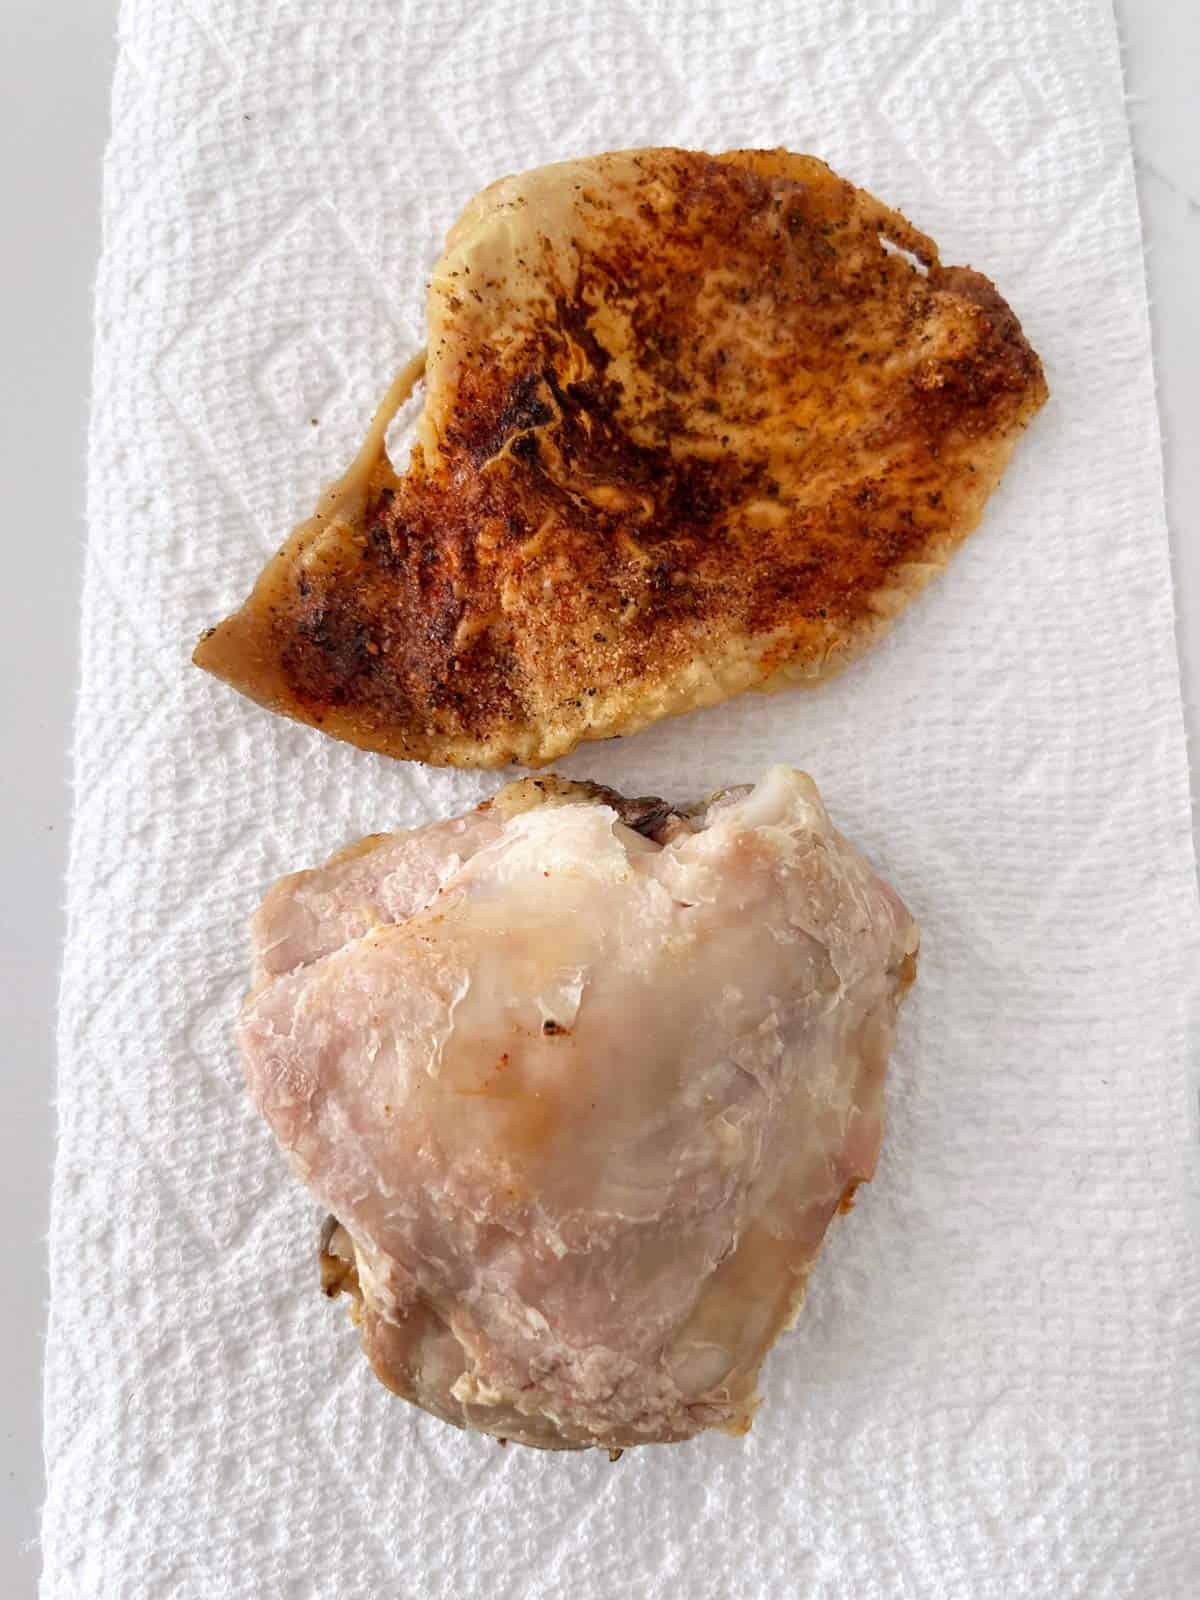 Removing the skin from leftover chicken thighs.